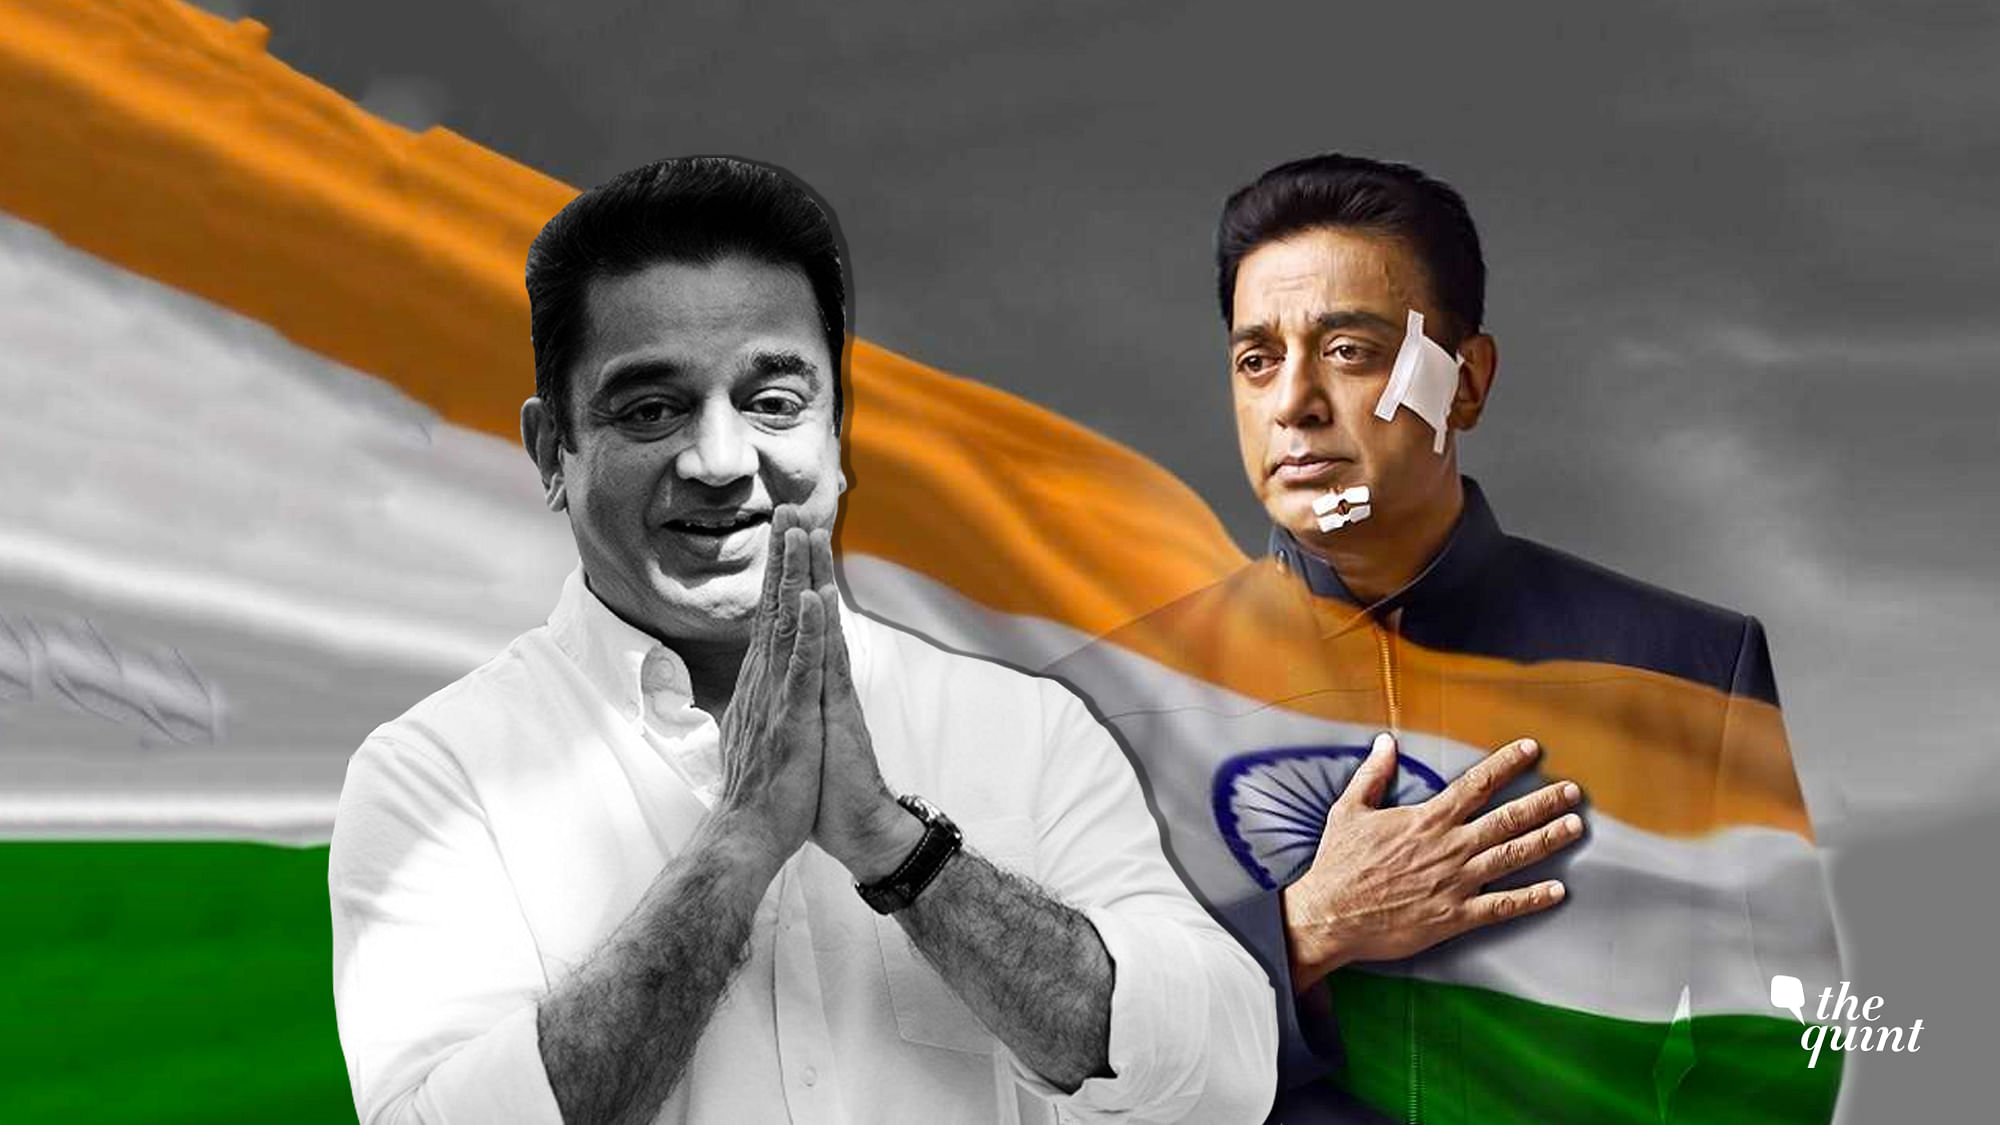 Slippers were thrown at actor-turned-politician Kamal Haasan when he was campaigning.